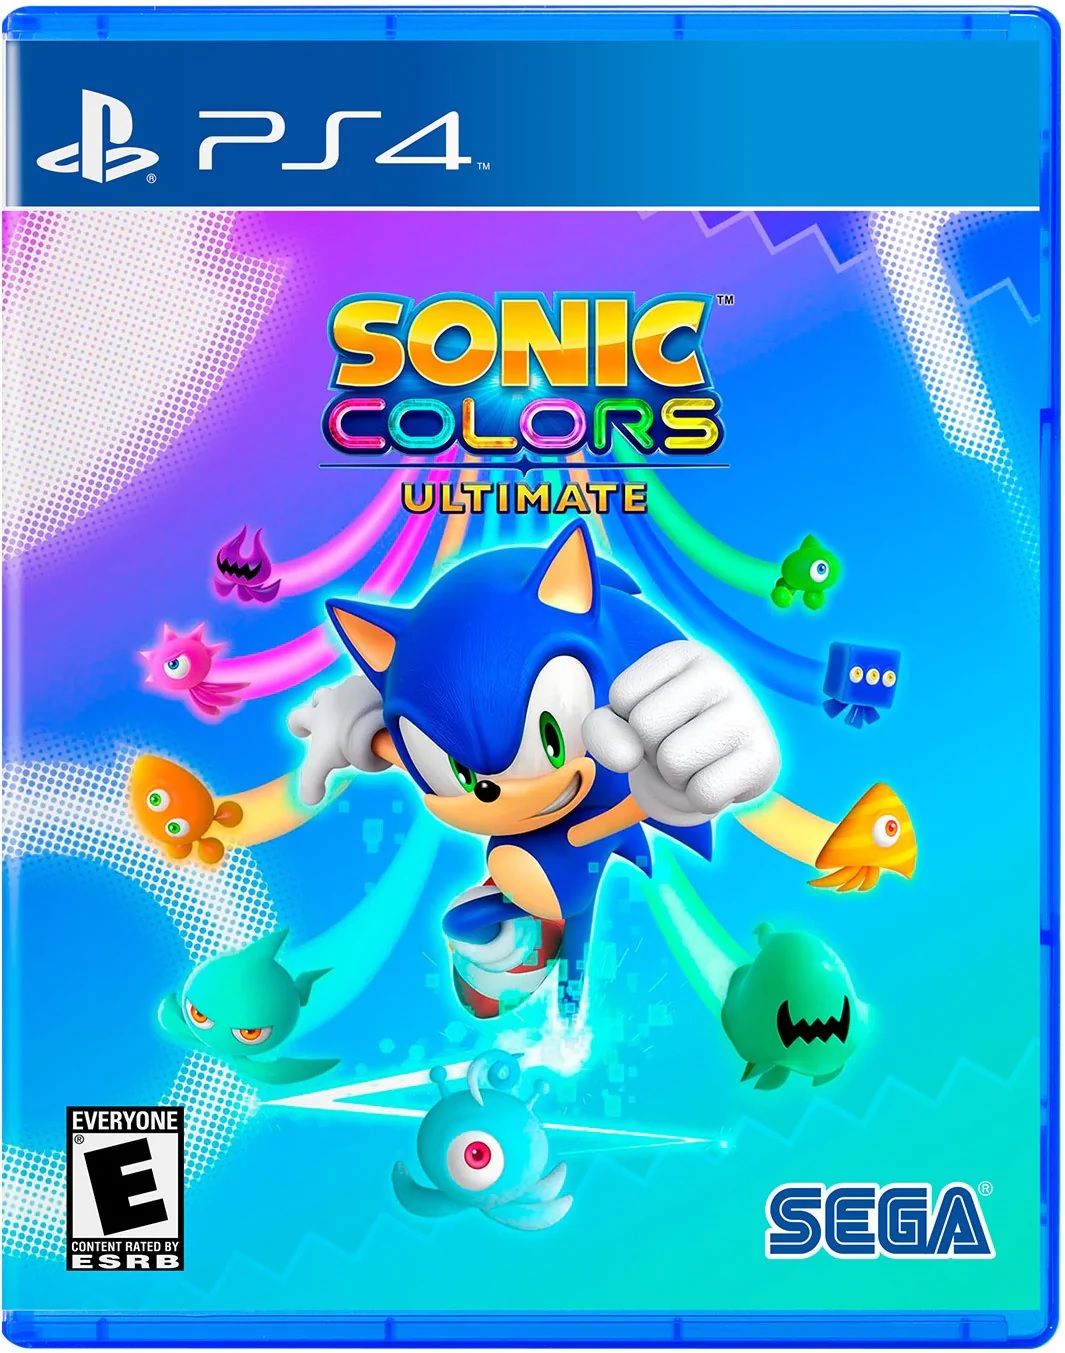 Sonic colors cover.jpg